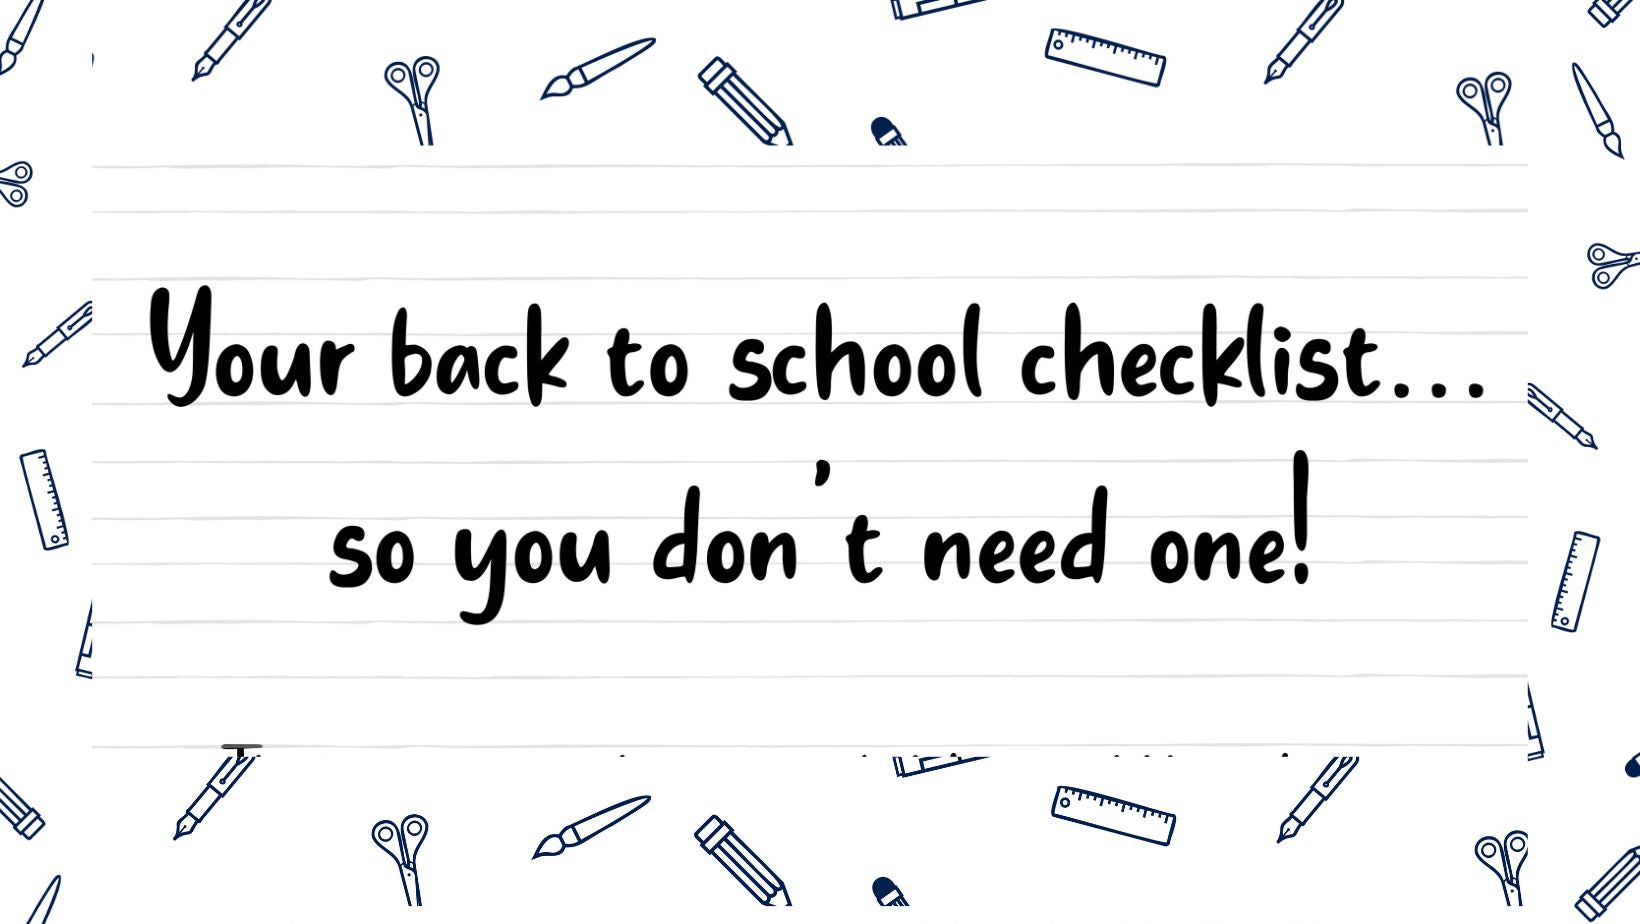 Your back-to-school checklist... so you don't need one!